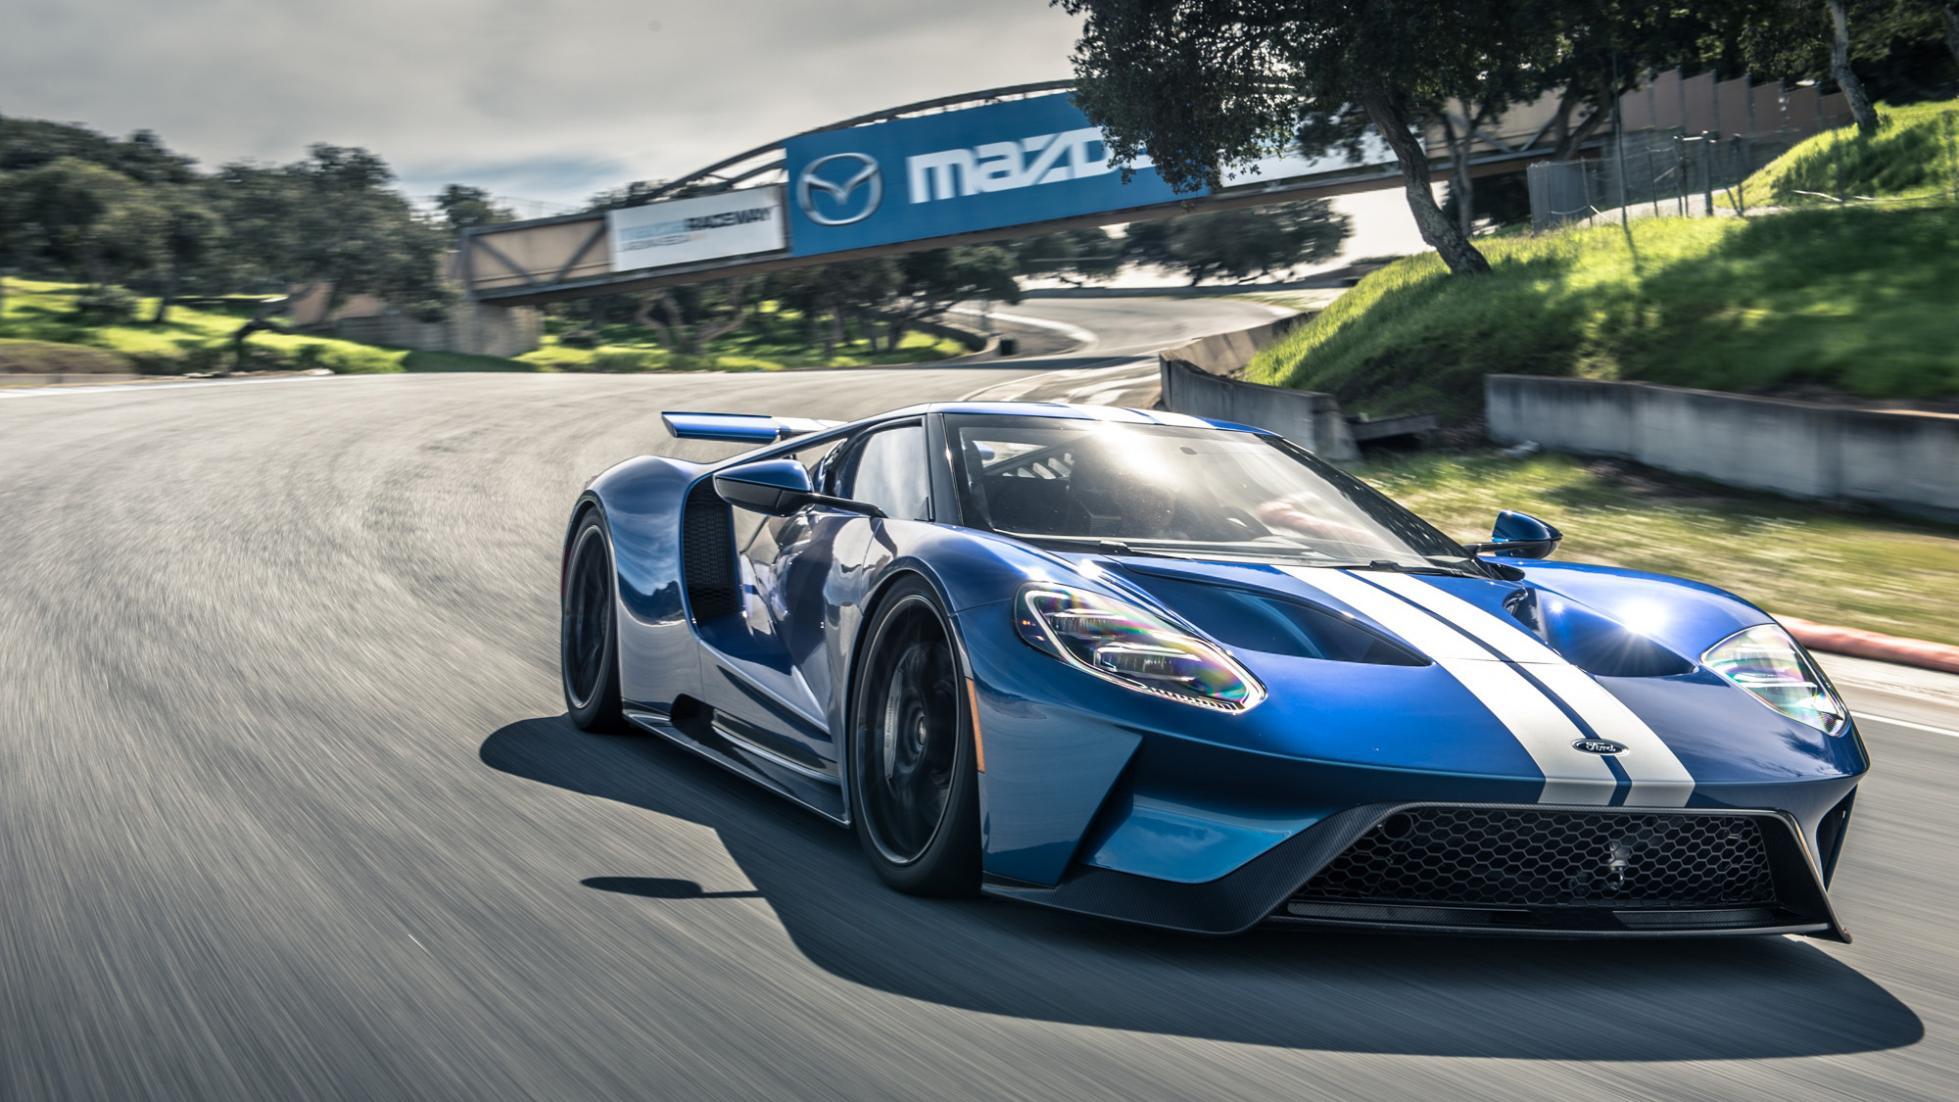 4. Ford GT superfast nose-lift